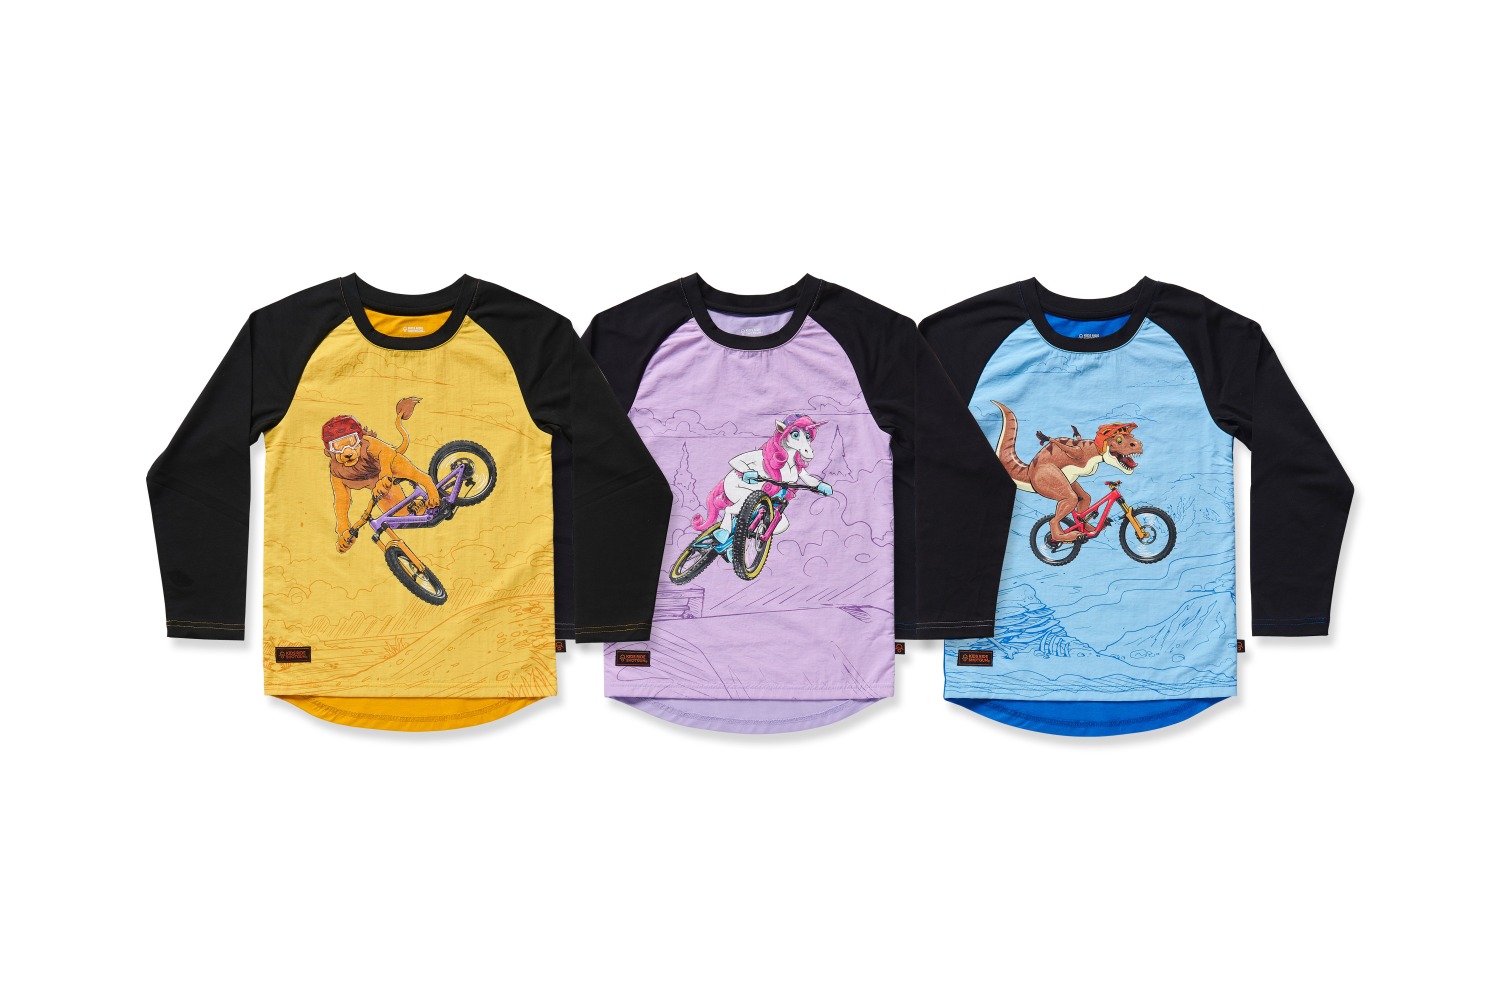 Shotgun release new jerseys for little riders aged 2 - 6 years old